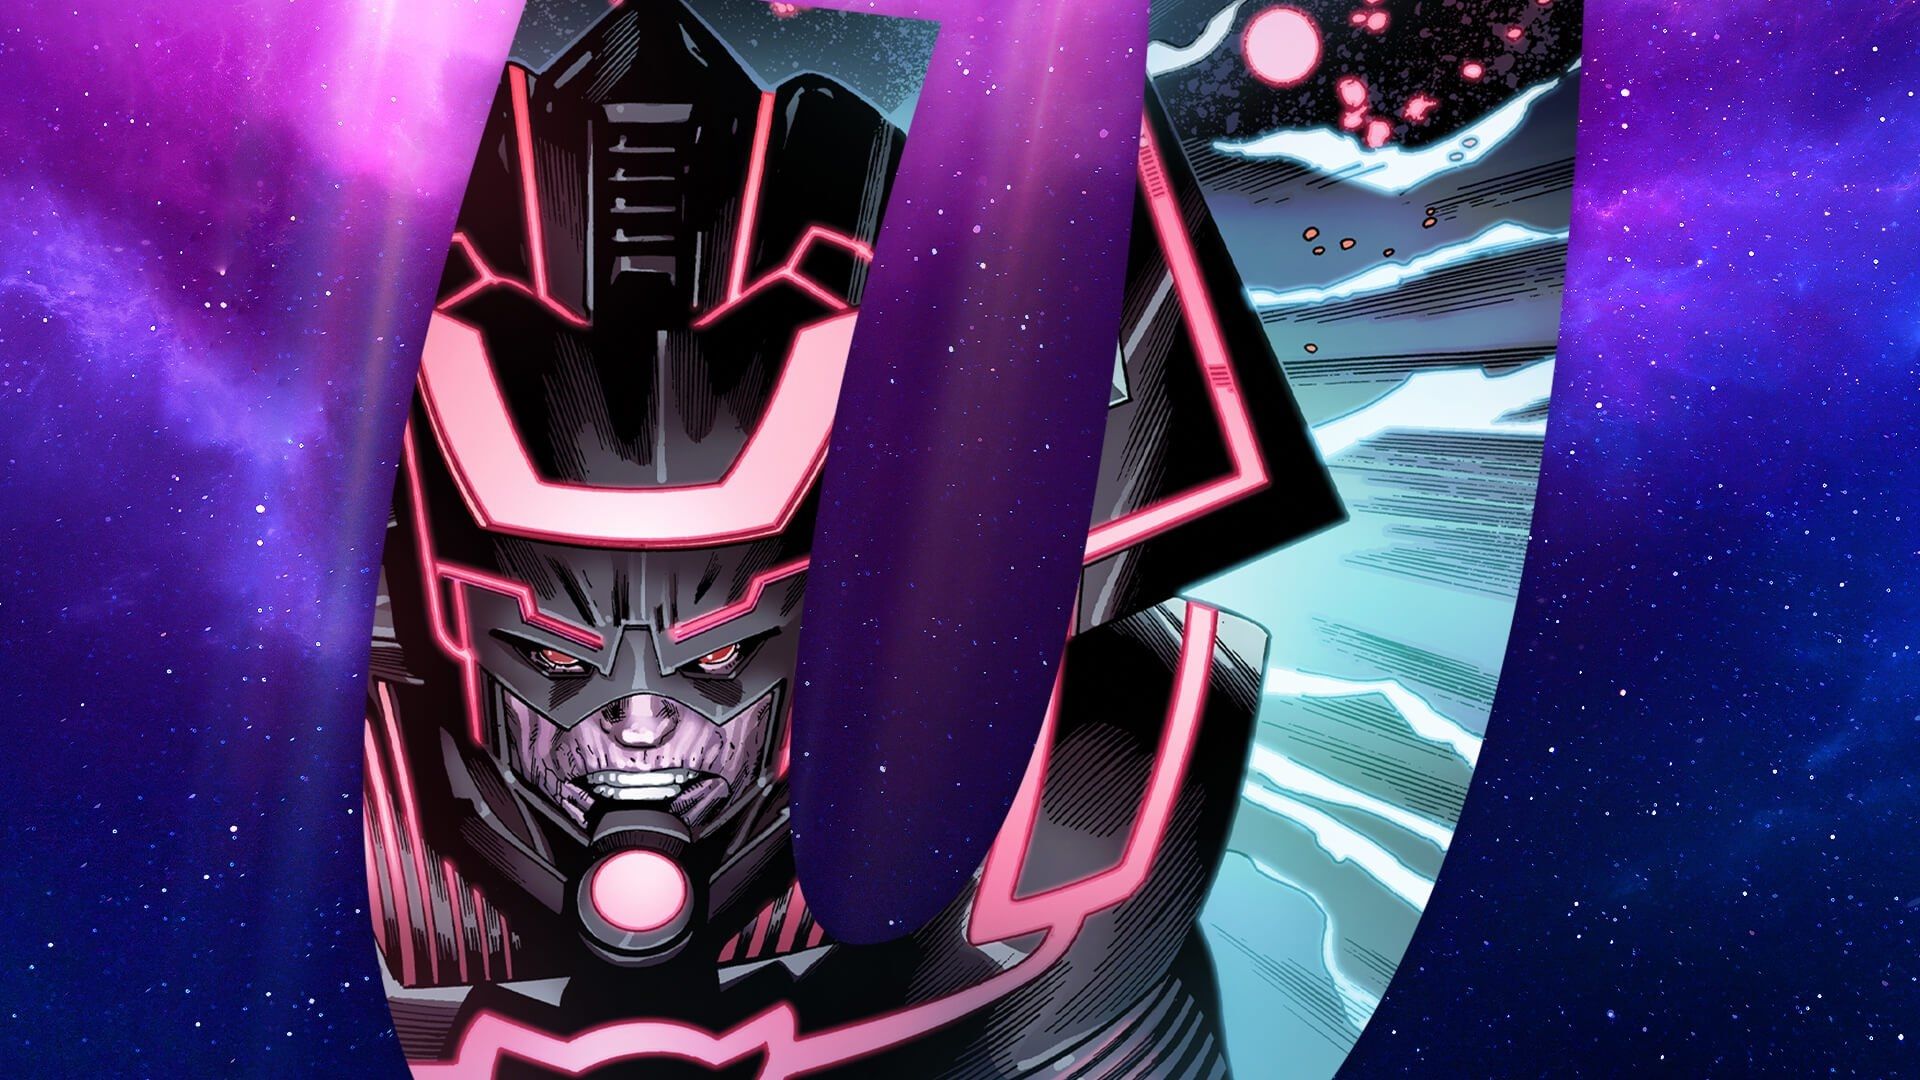 Fortnite Marvel Galactus Wallpaper, HD Games 4K Wallpaper, Image, Photo and Background